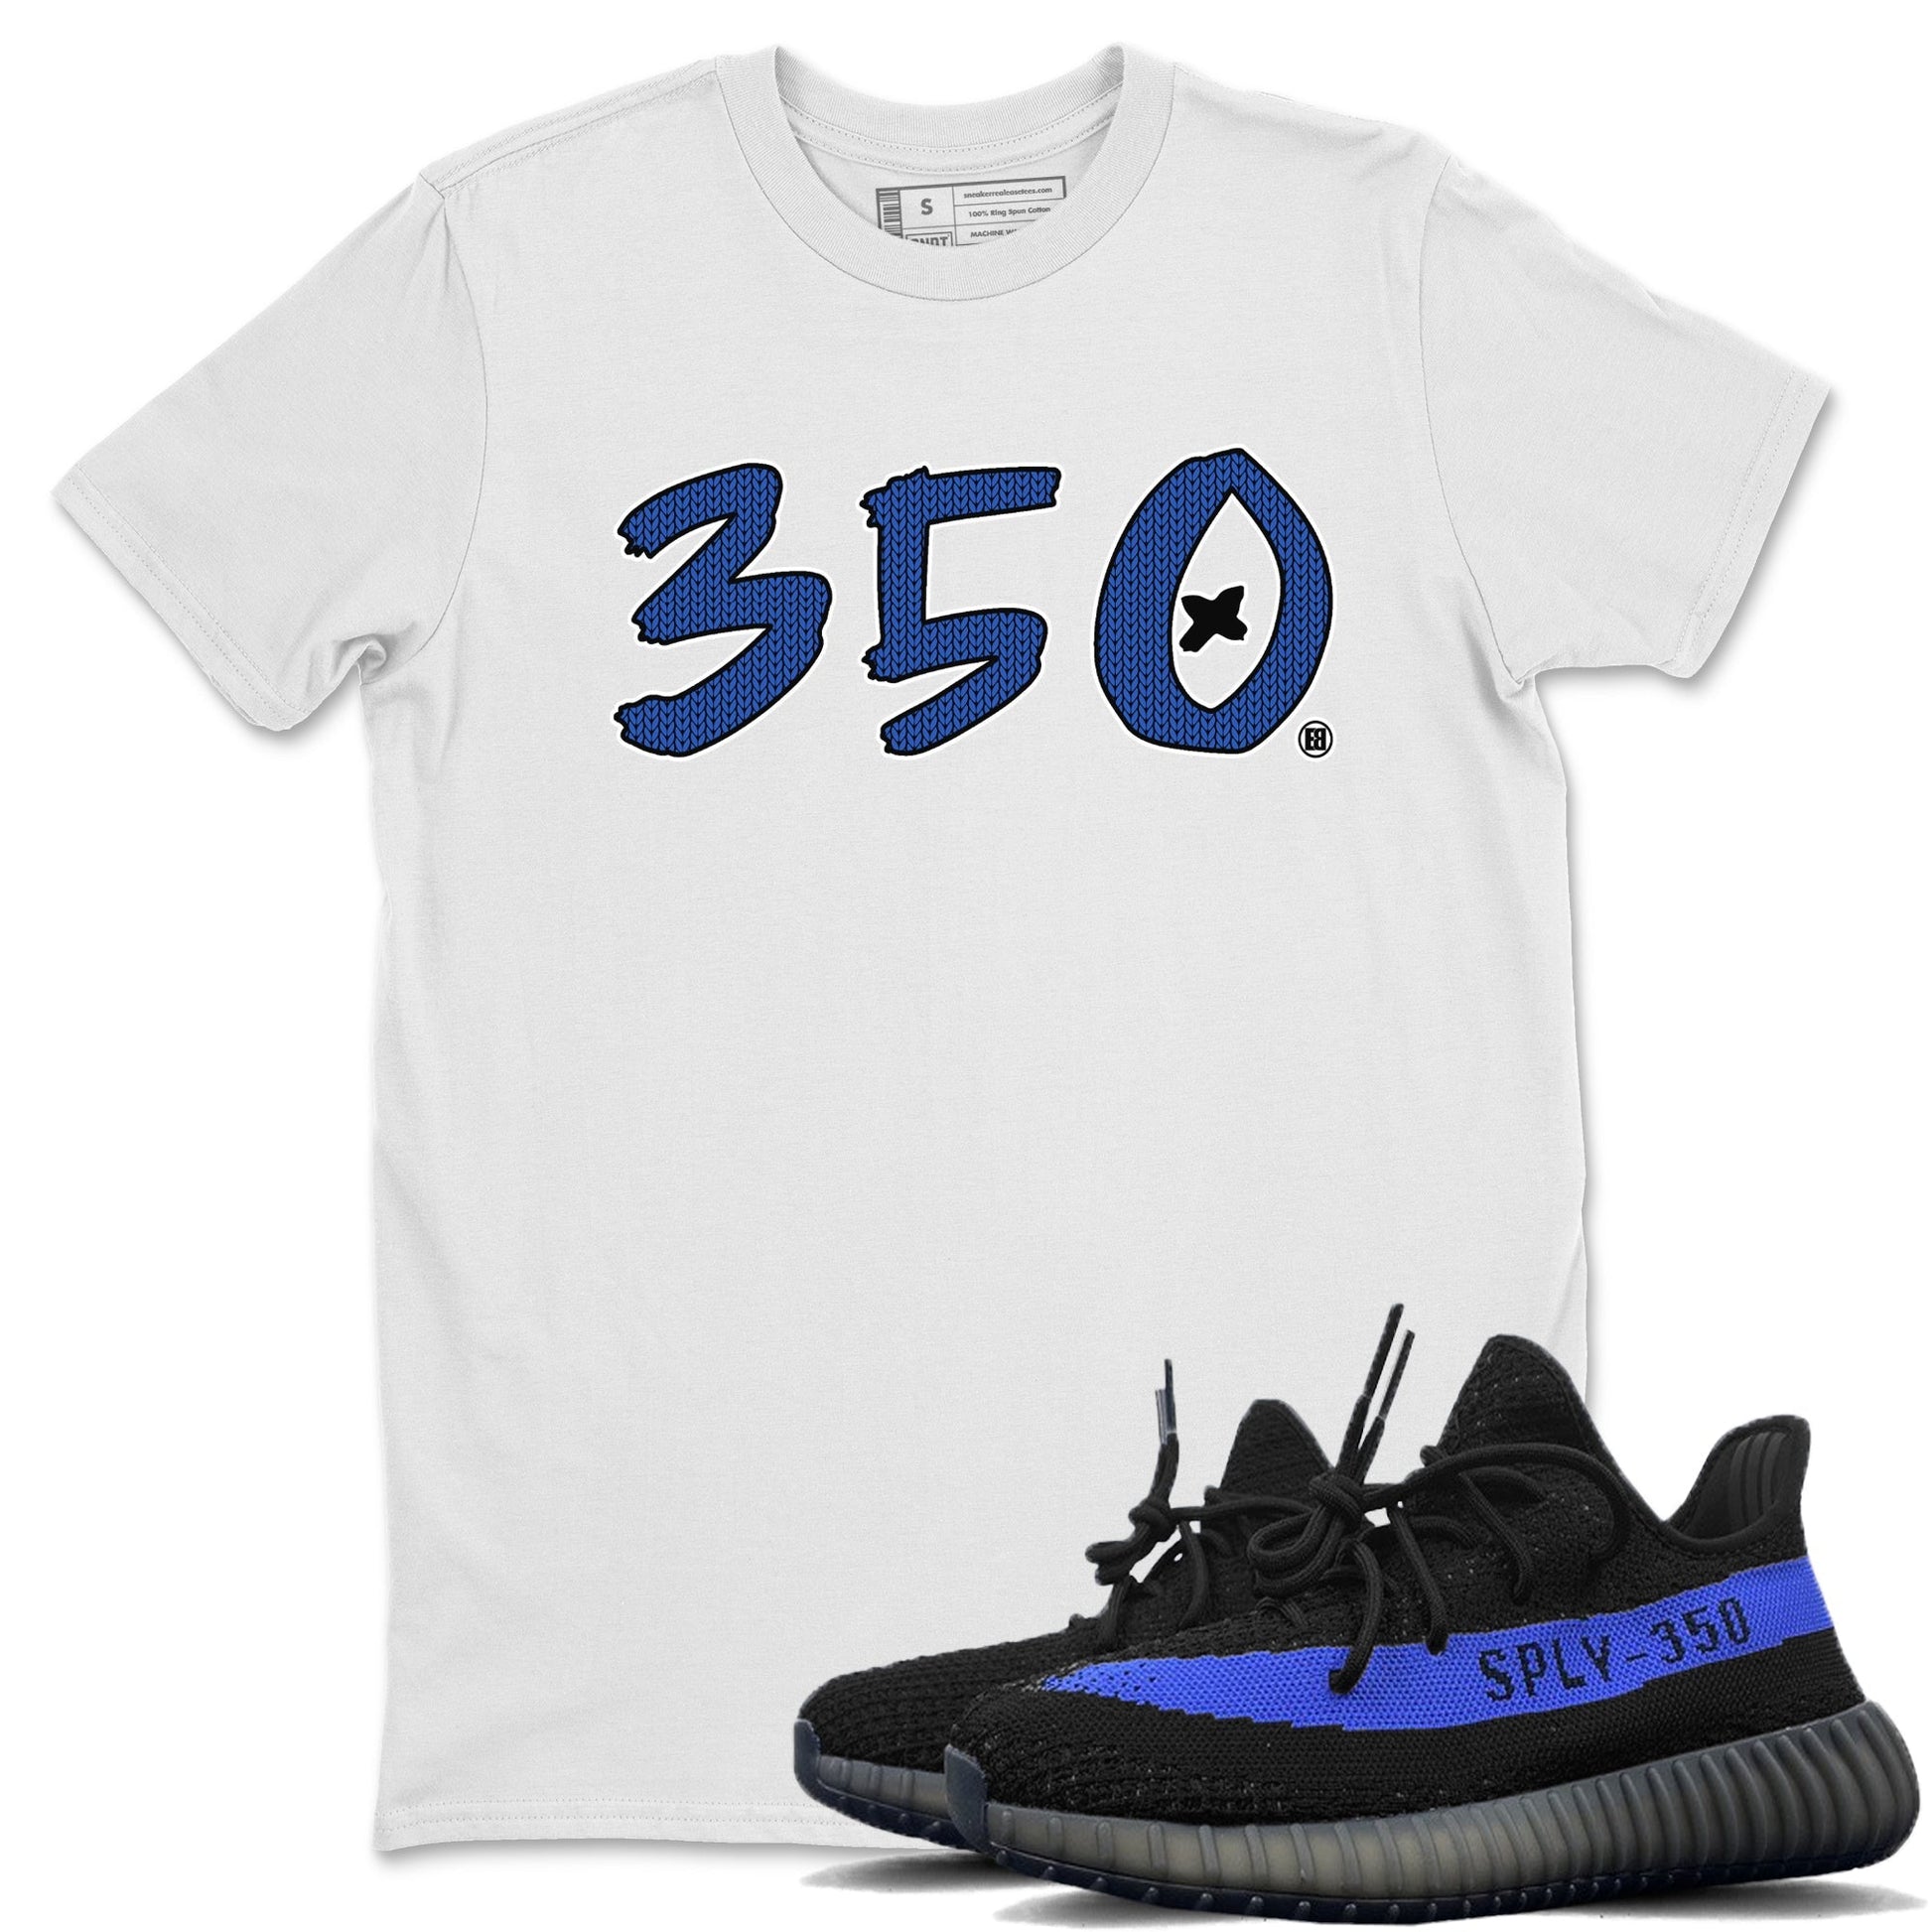 Yeezy 350 Dazzling Blue Sneaker Match Tees Number 350 Sneaker Tees Yeezy 350 Dazzling Blue Sneaker Release Tees Unisex Shirts